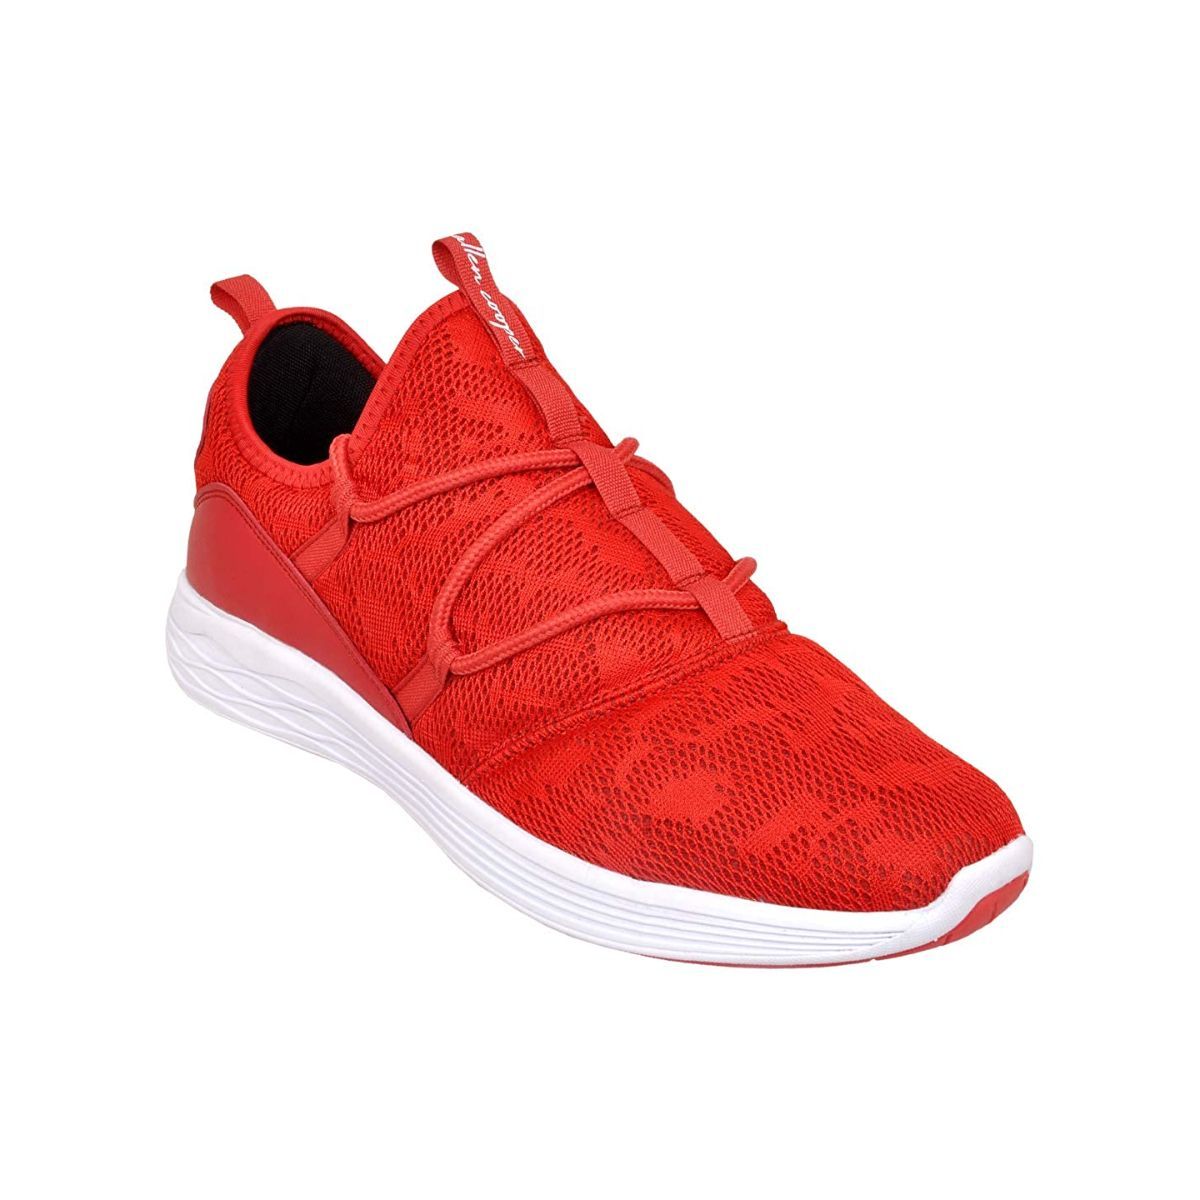 Allen Cooper Red Sports Shoes For Men - 8